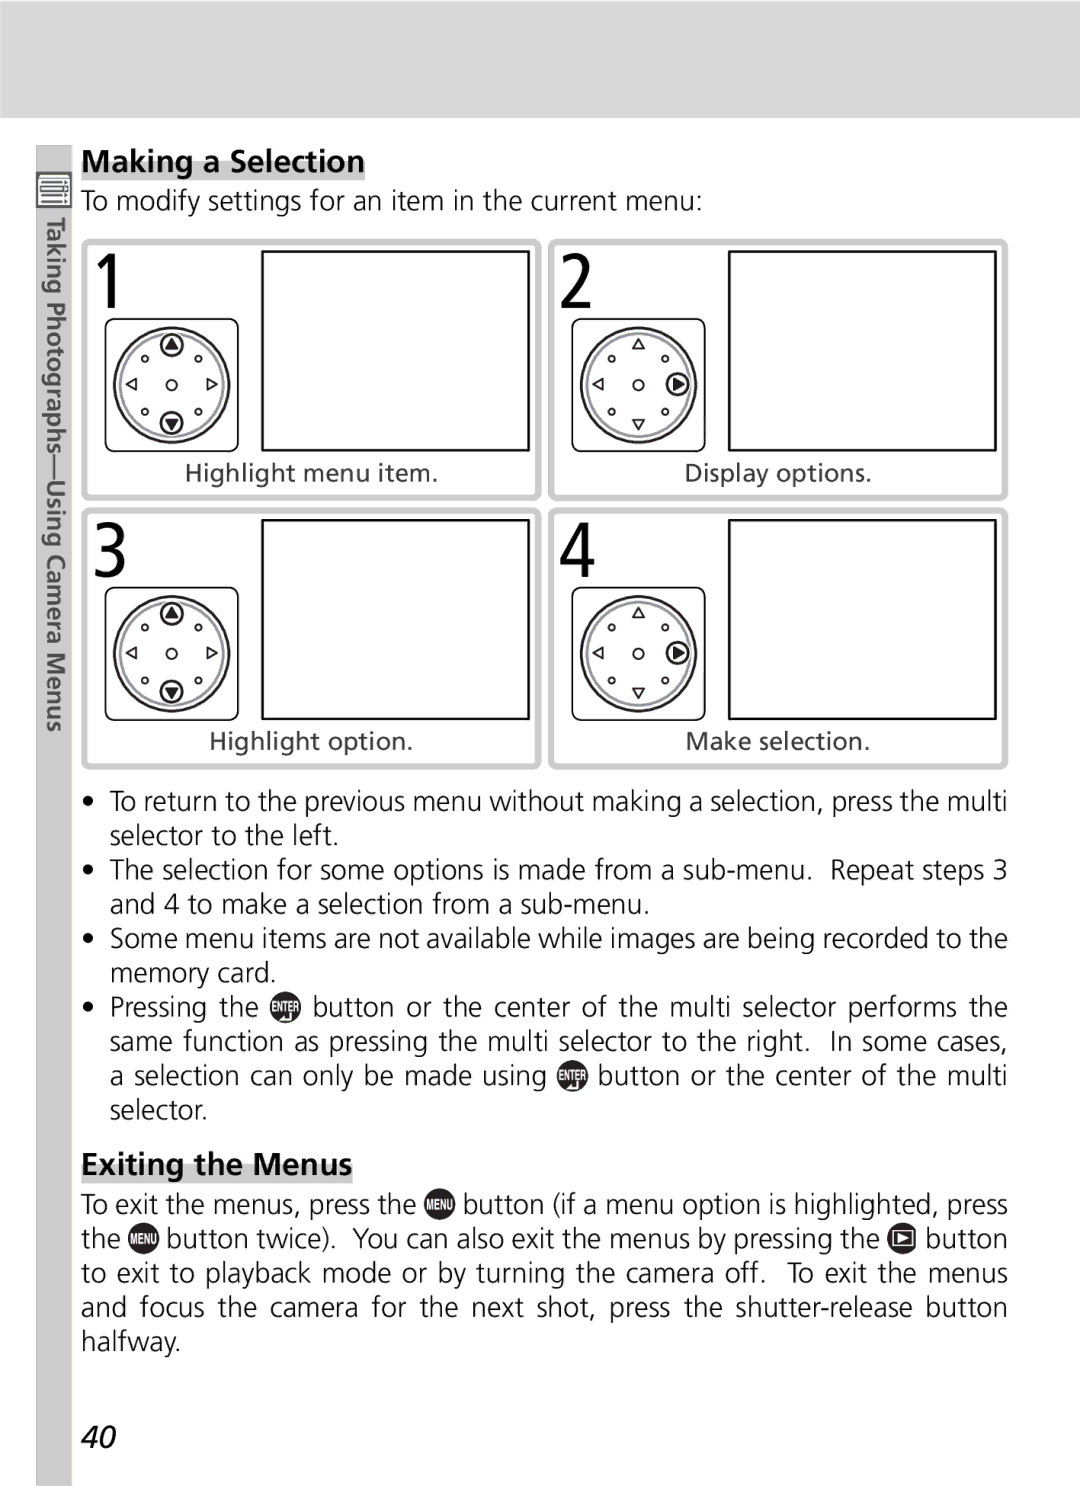 Nikon D2Hs manual Making a Selection, Exiting the Menus, To modify settings for an item in the current menu 